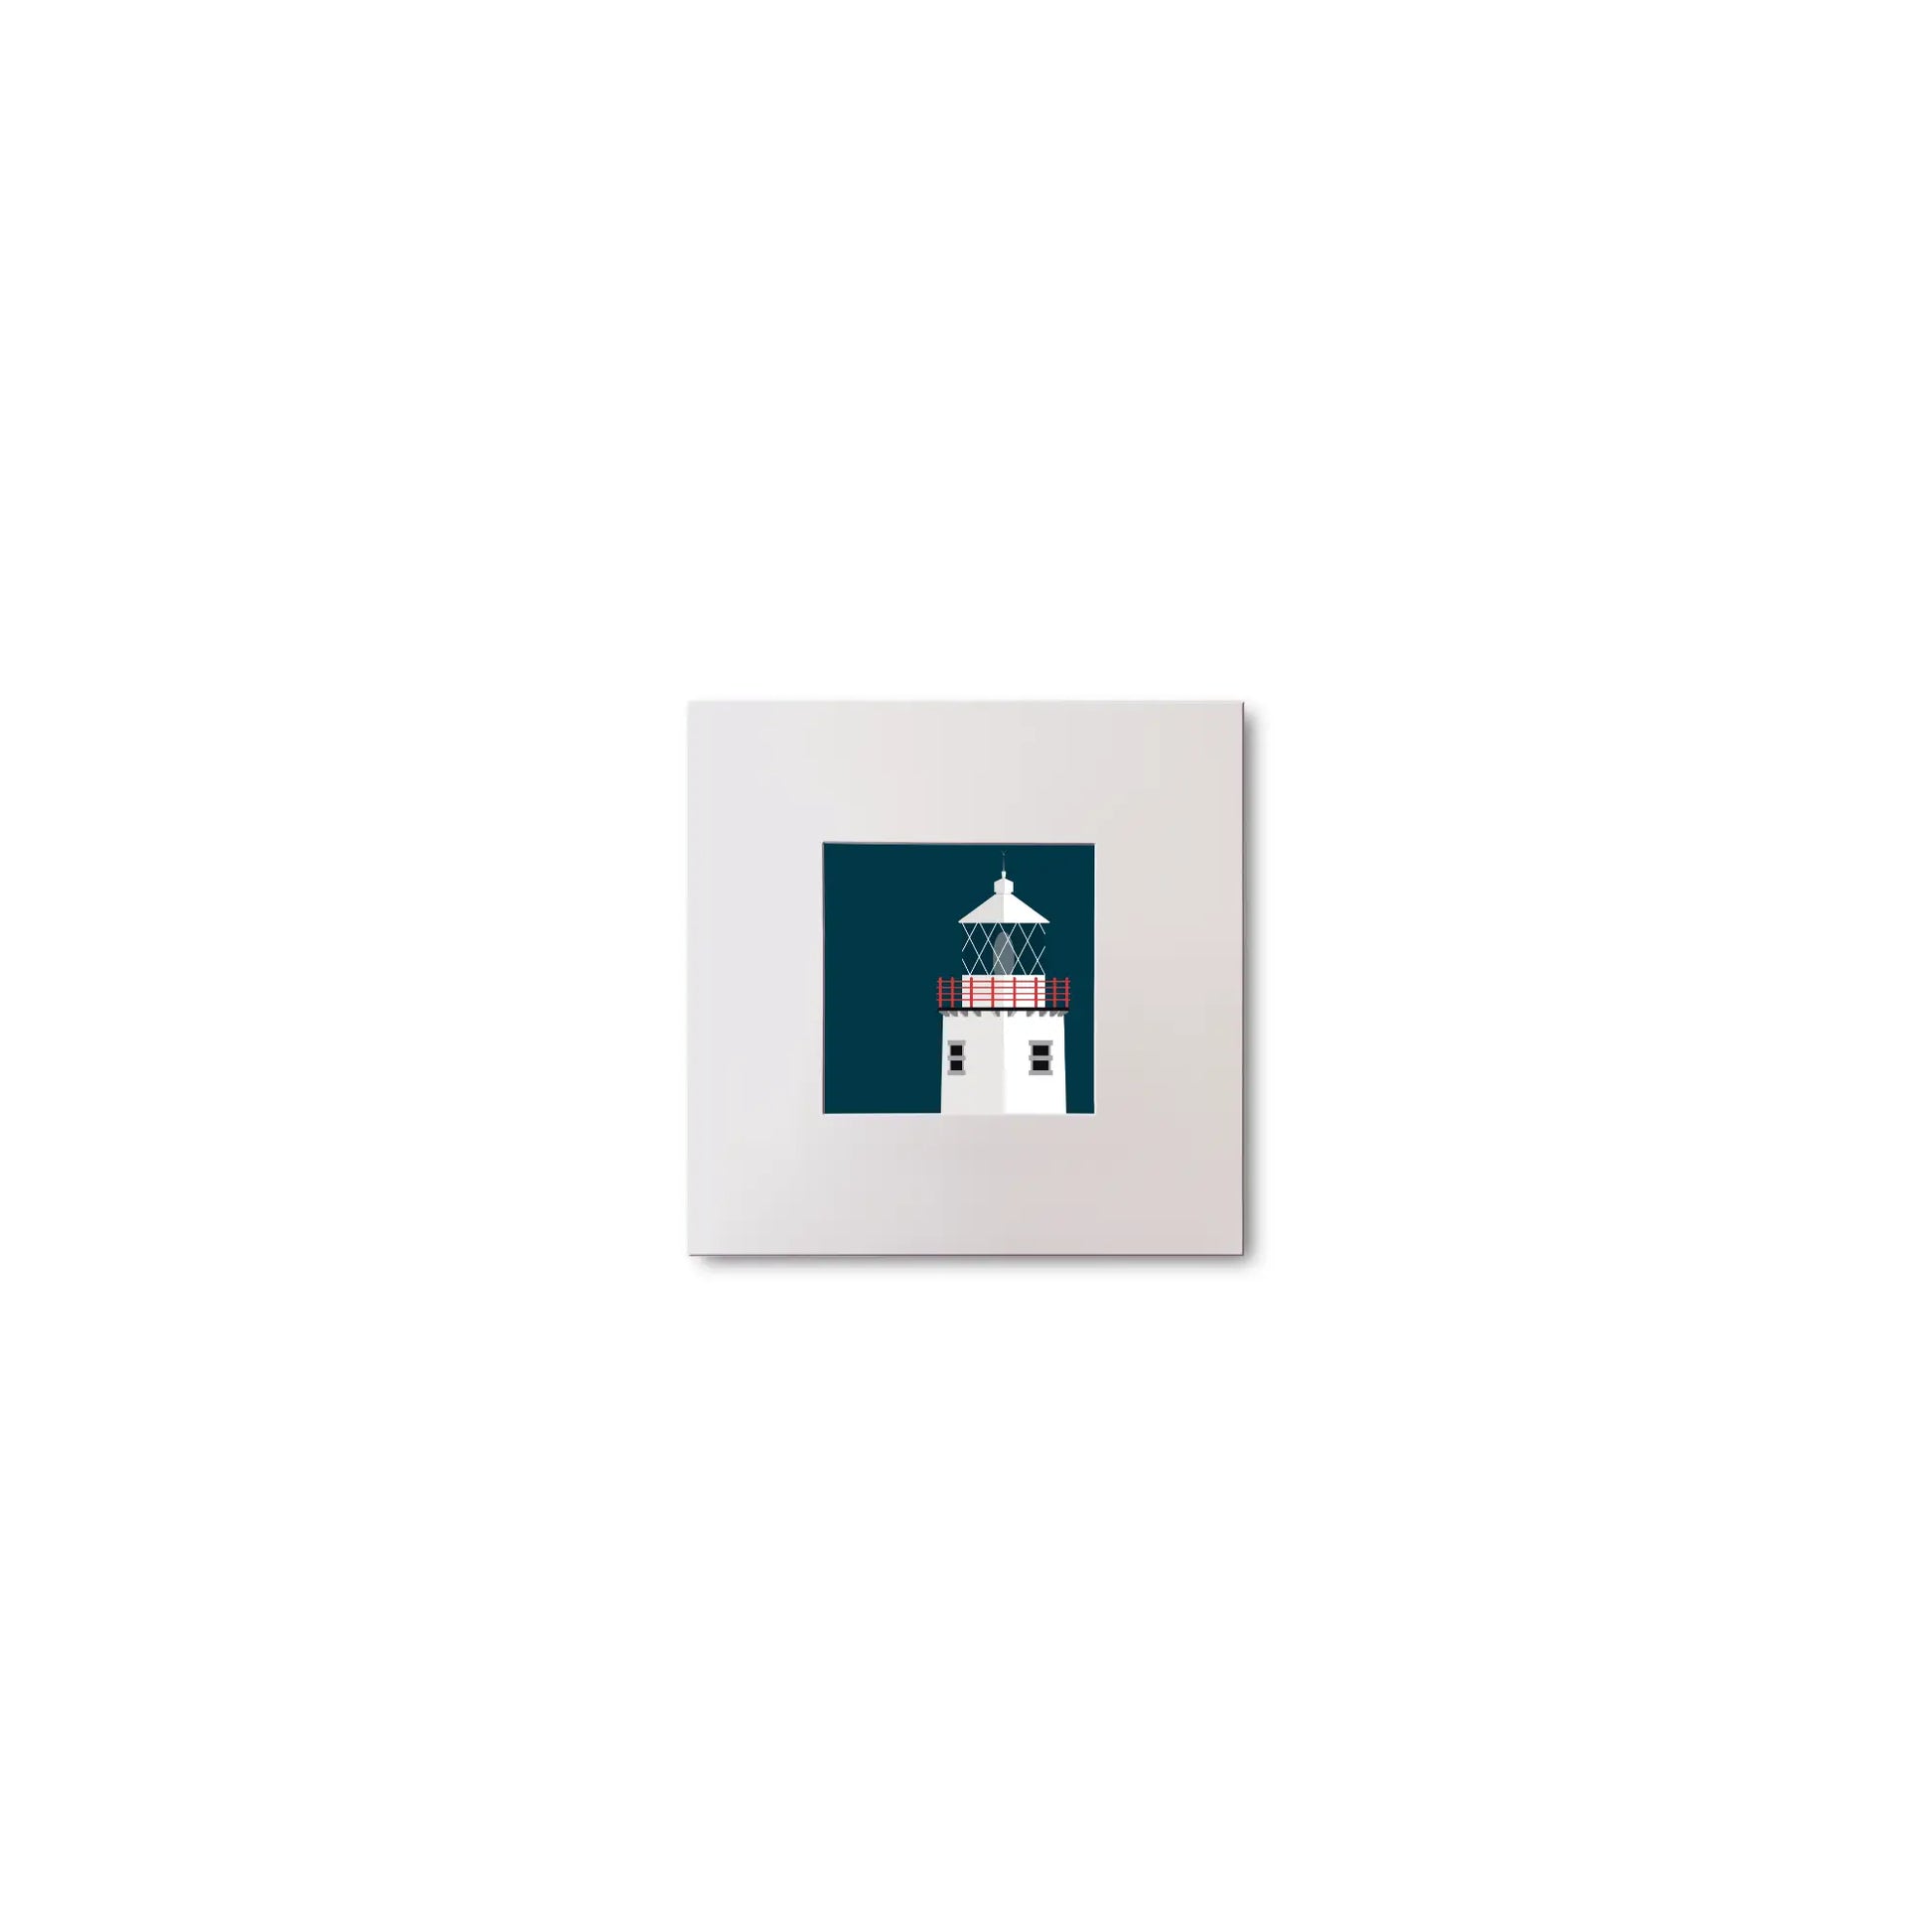 Illustration of Fanad Head lighthouse on a midnight blue background, mounted and measuring 10x10cm.